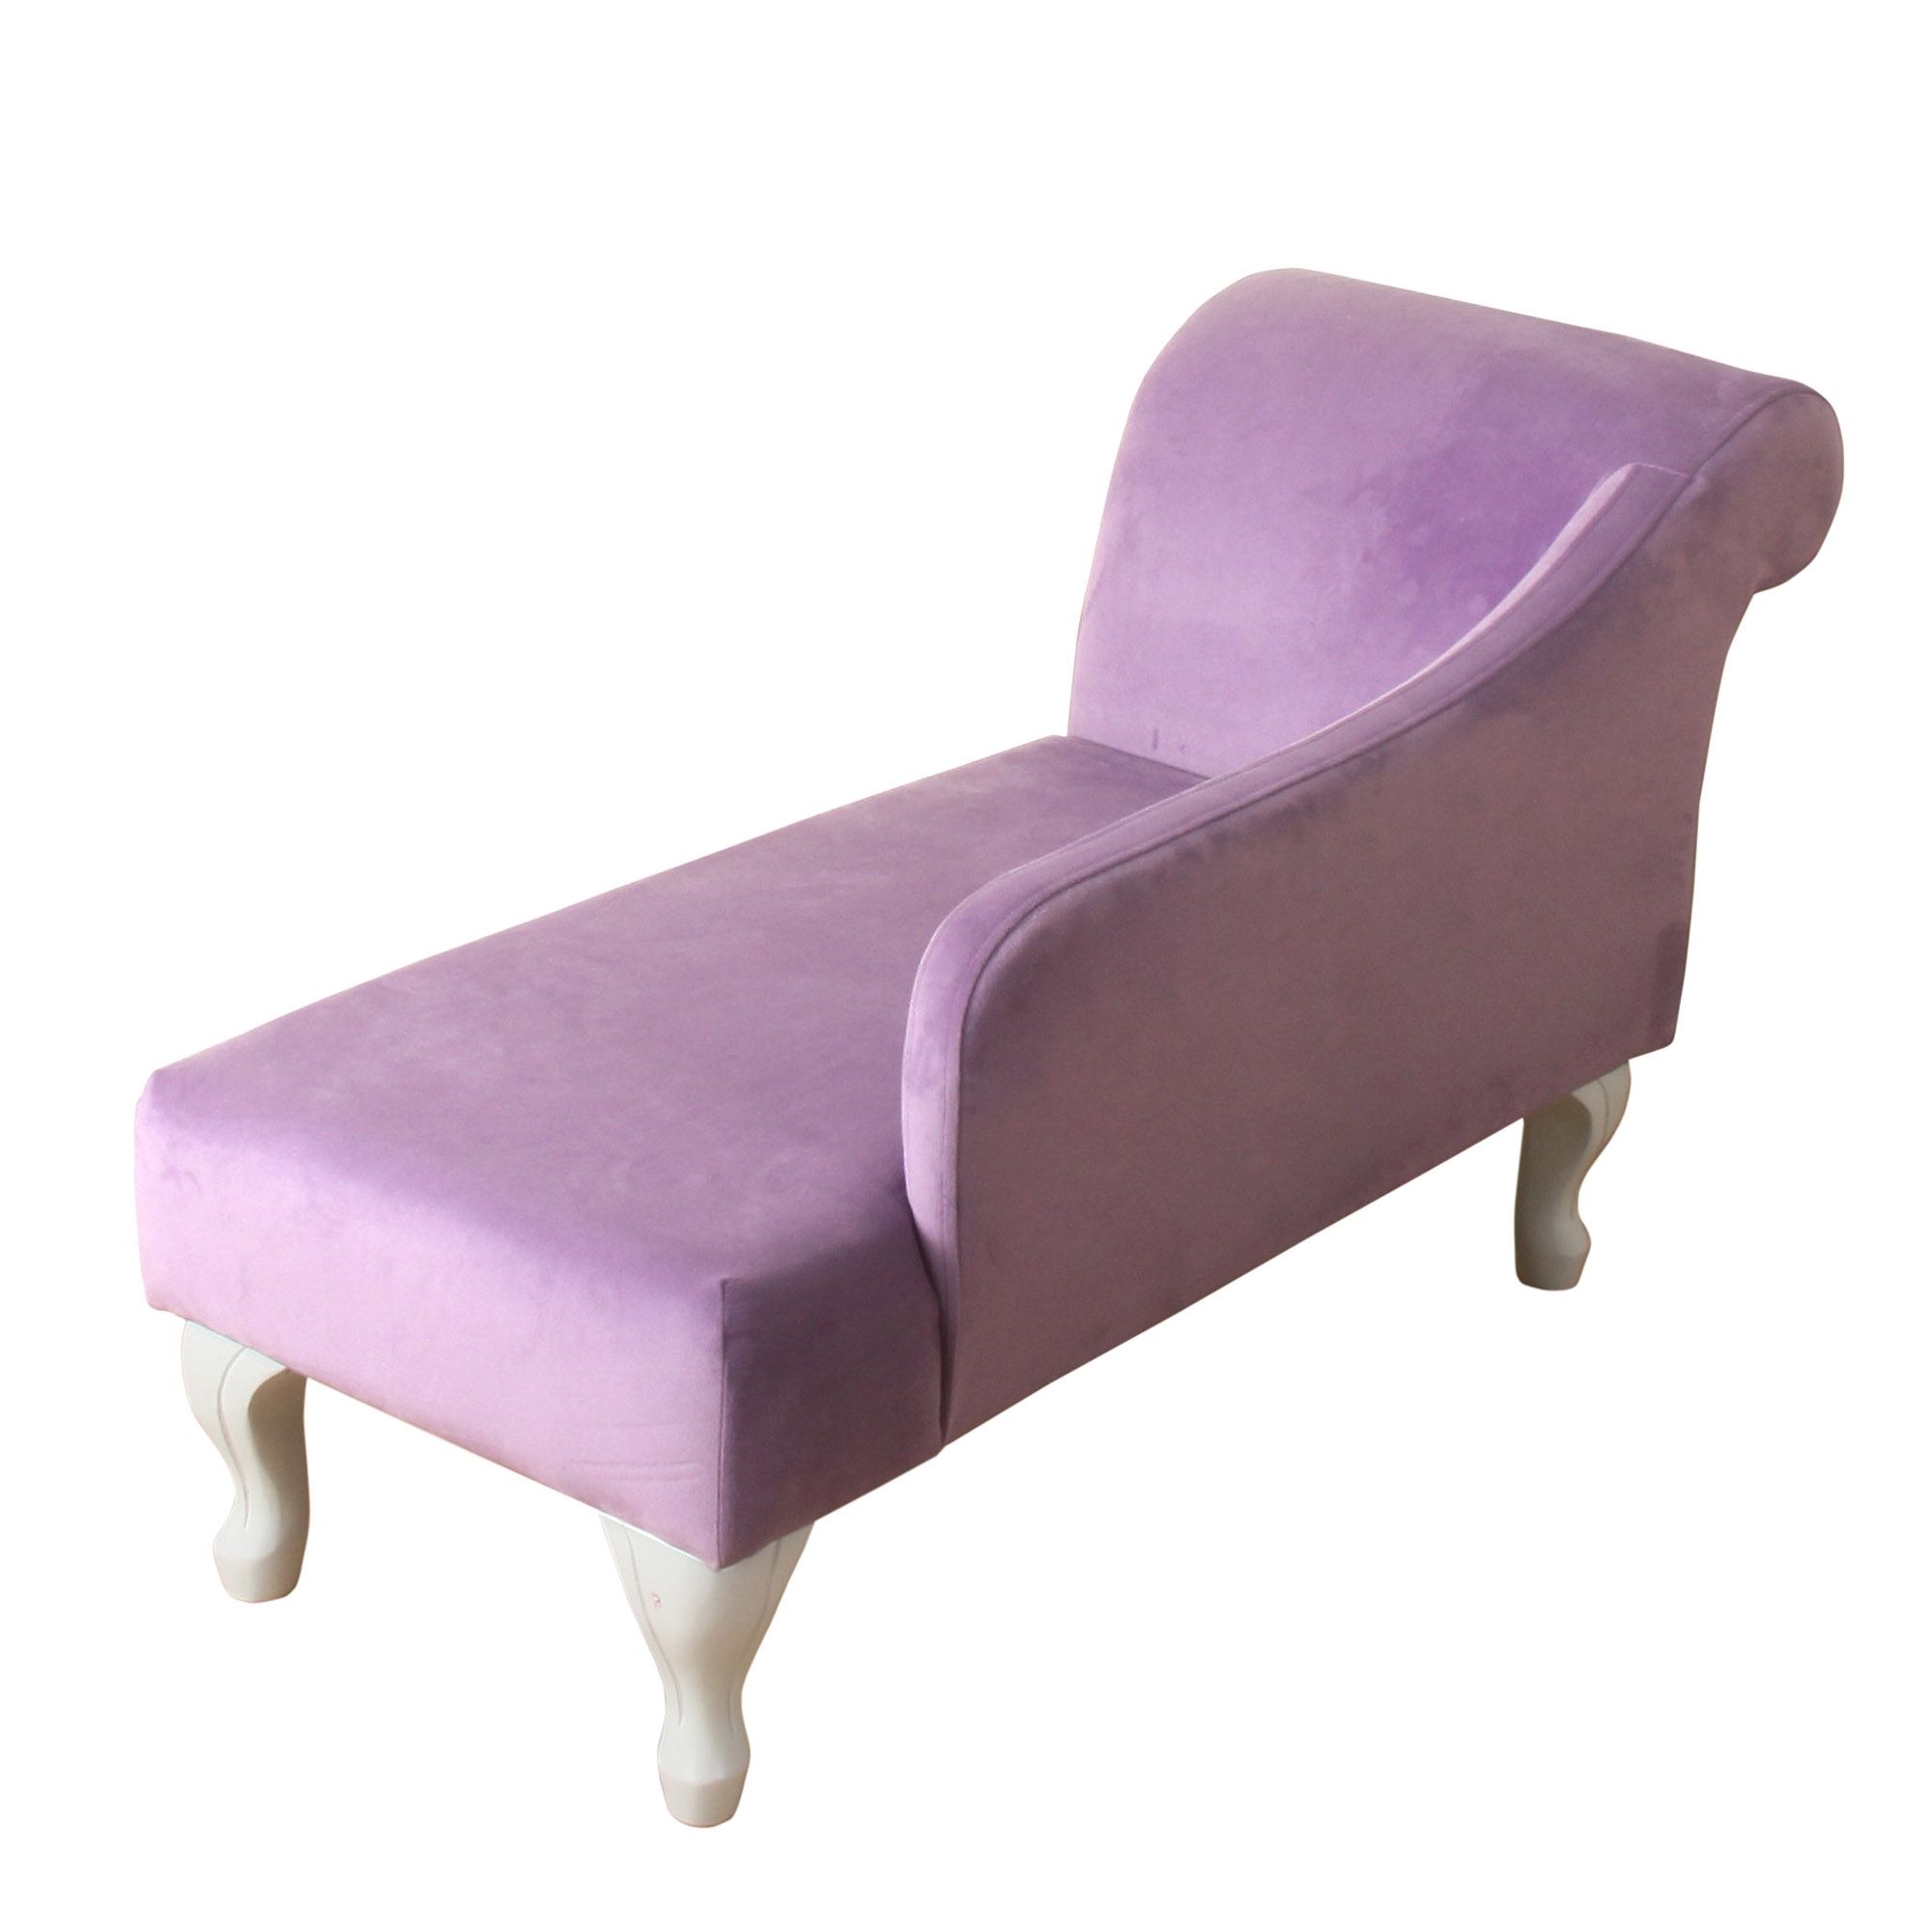 Homepop Diva Juvenile Chaise Lounge – Homepop Throughout Recent Purple Chaise Lounges (View 9 of 15)